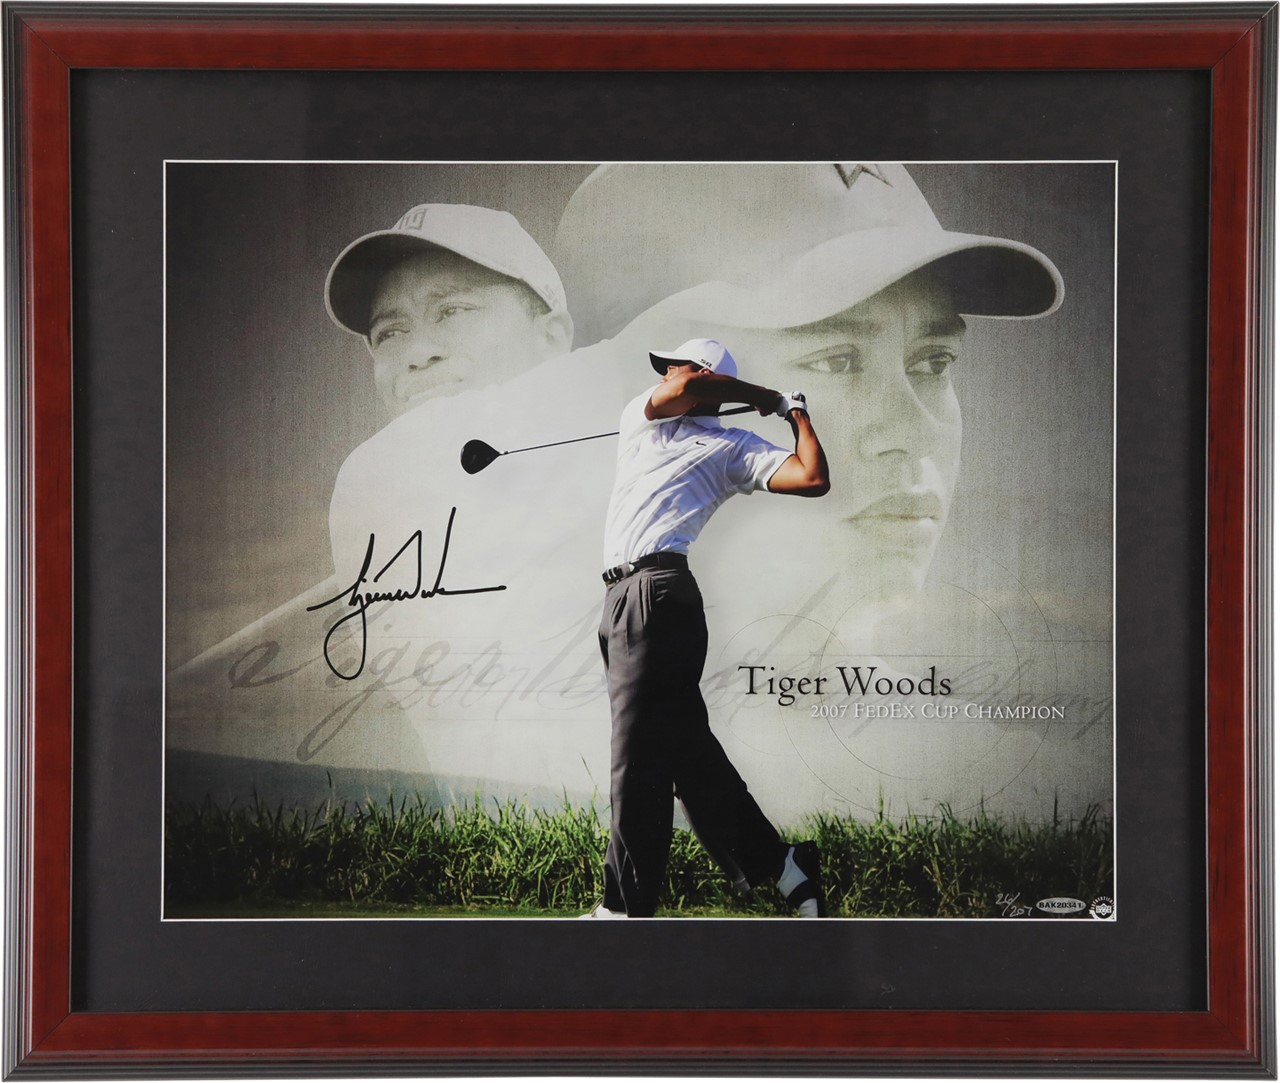 - Tiger Woods 2007 FedEx Cup Champion Oversized Limited Edition Signed Photograph 26/207 (UDA)